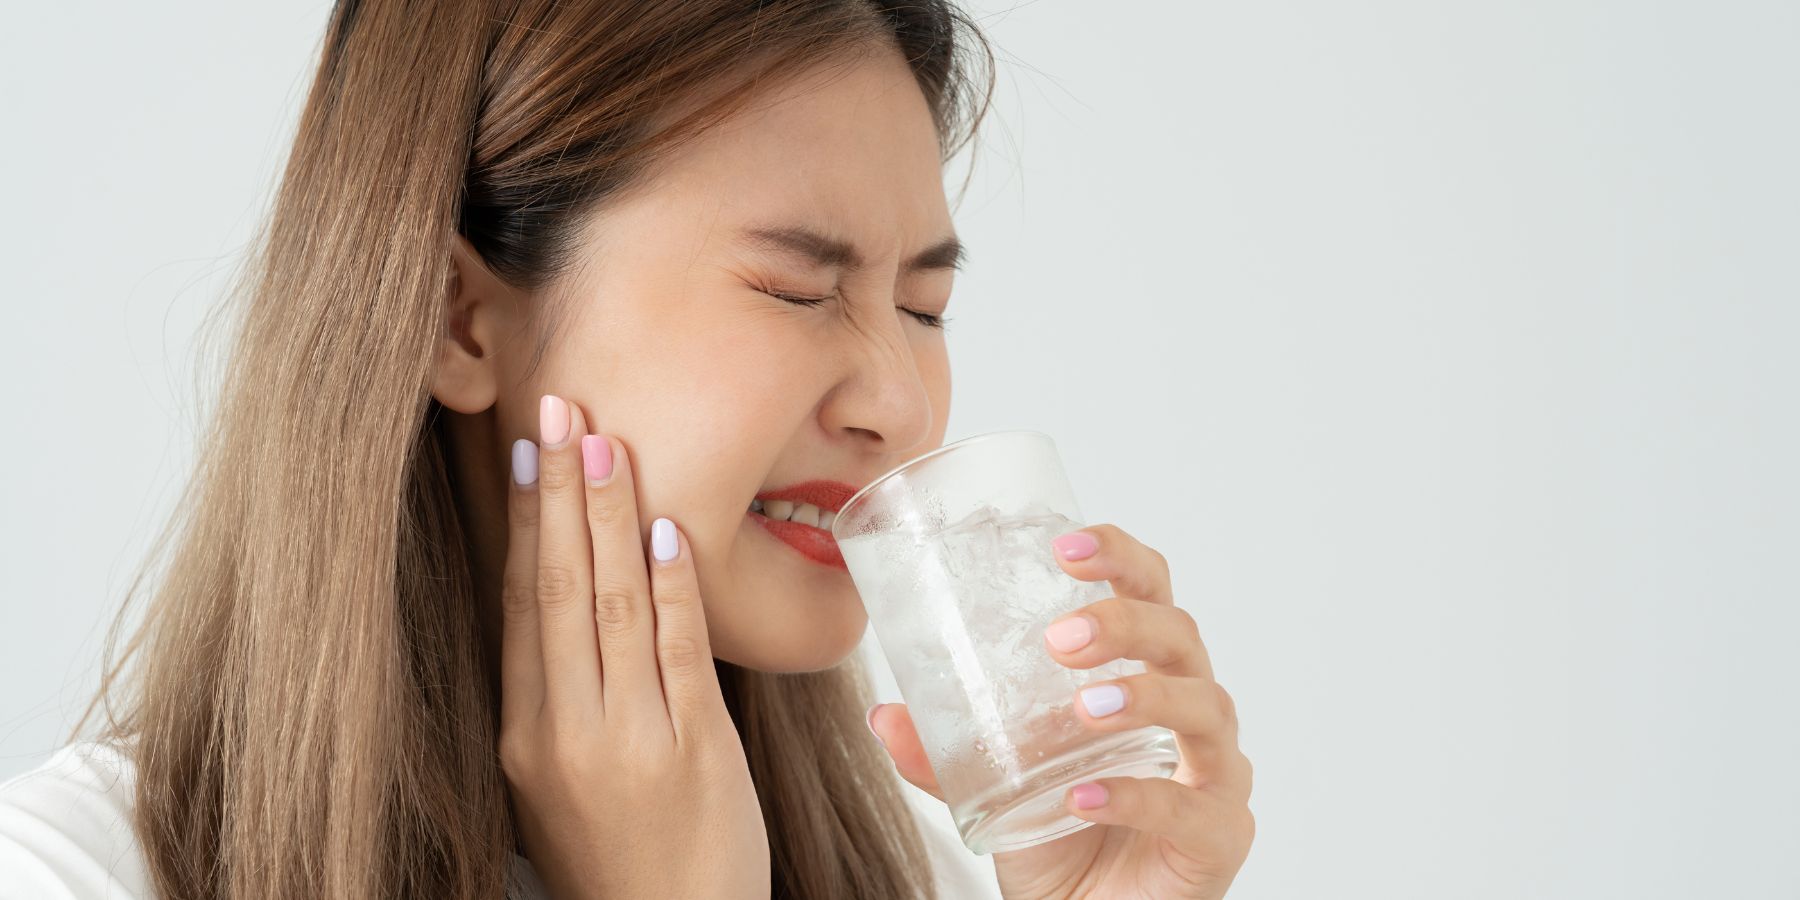 How Cold Water Affects Different Types of Tooth Sensitivity